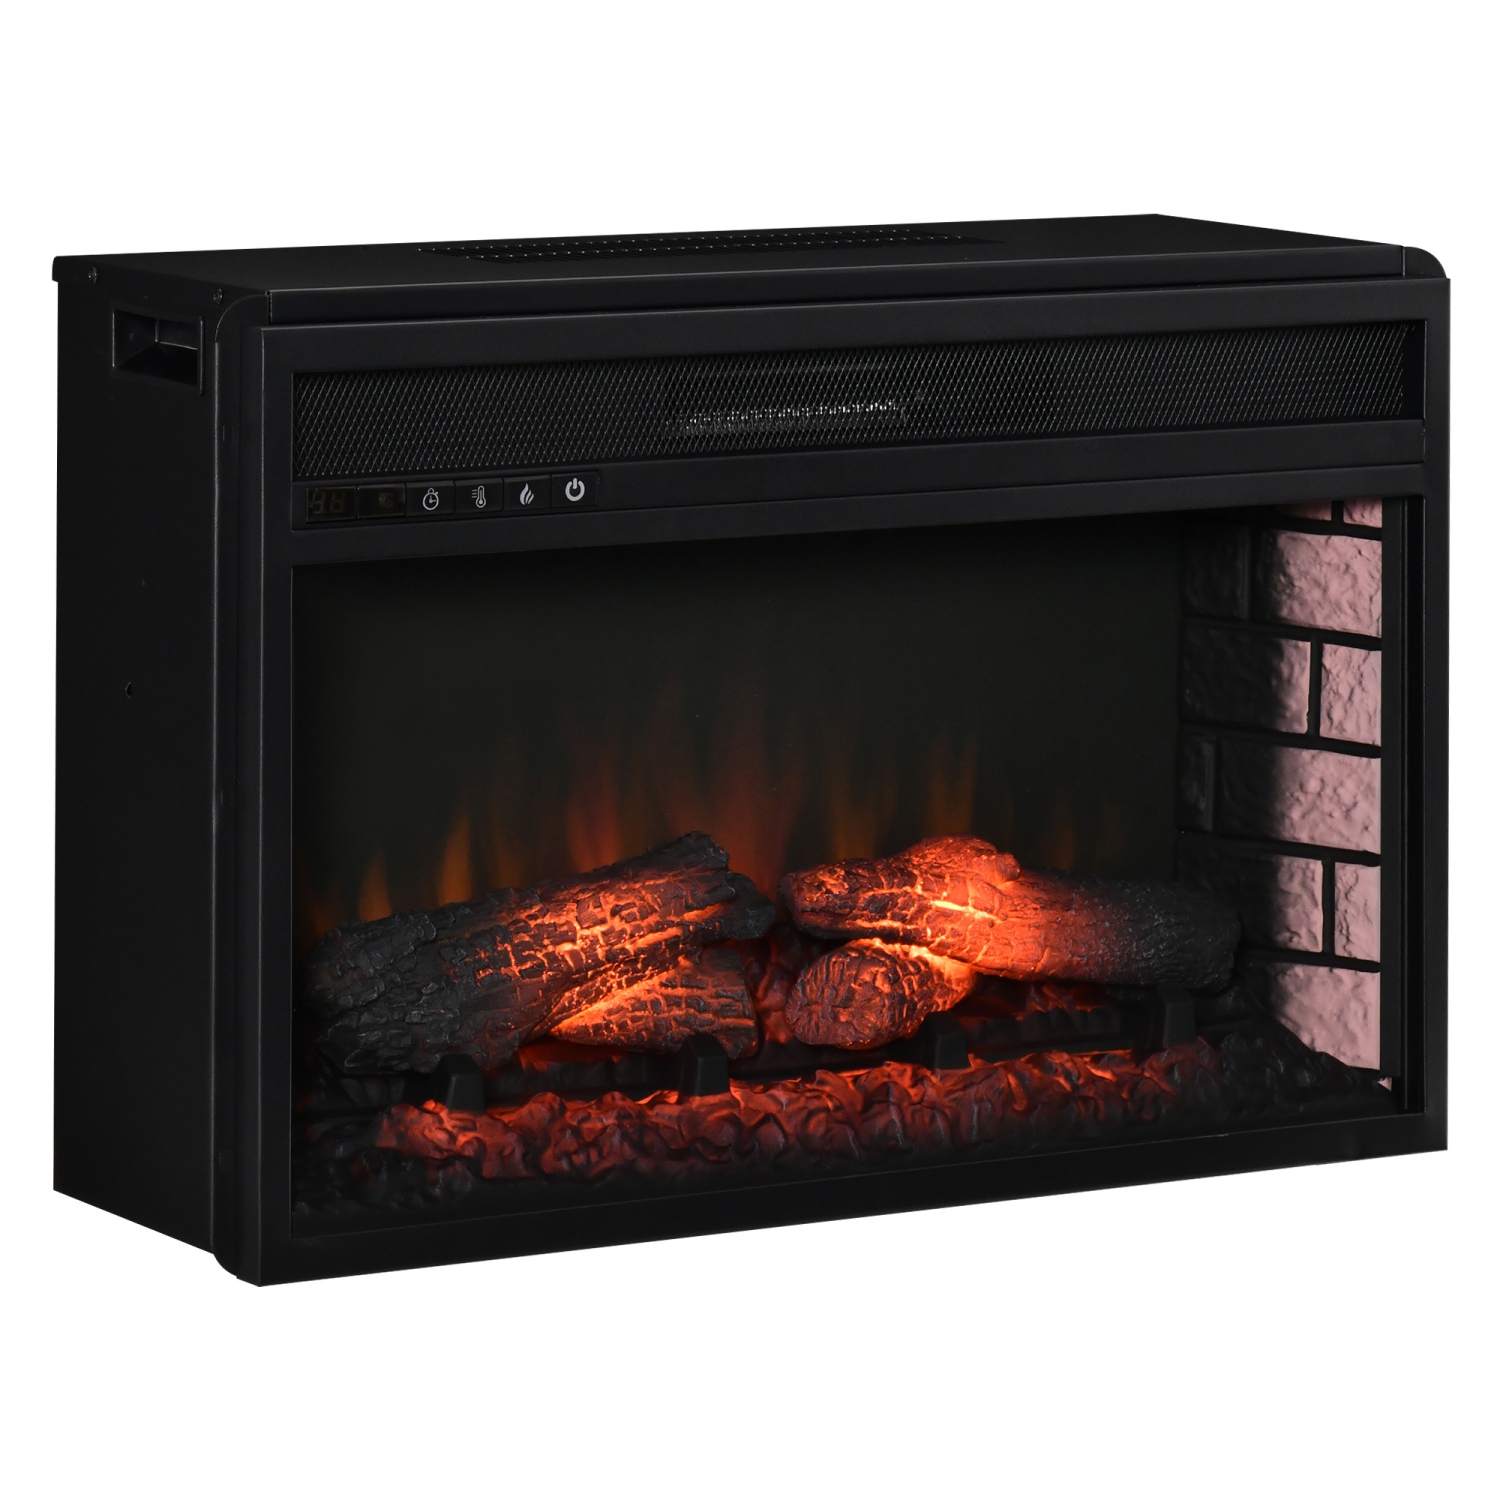 HOMCOM 27" Electric Fireplace Insert, Retro Recessed Fireplace Heater with Realistic Log Flame, Remote Control, Adjustable Brightness, 1400W, Black